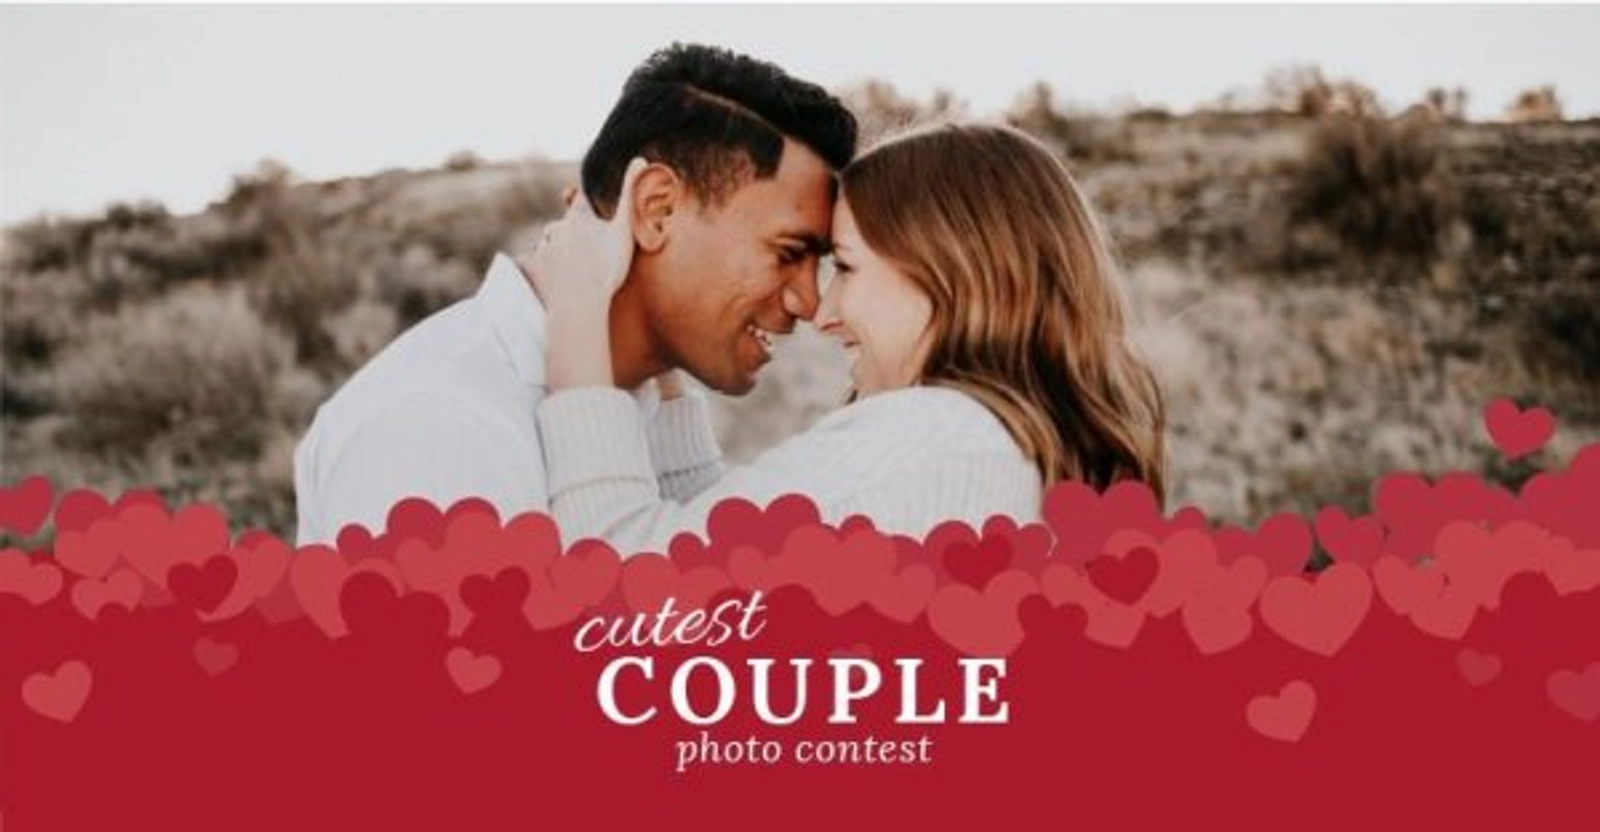 Valentines Day Sweetheart Photo Contest  - Thumbnail Image